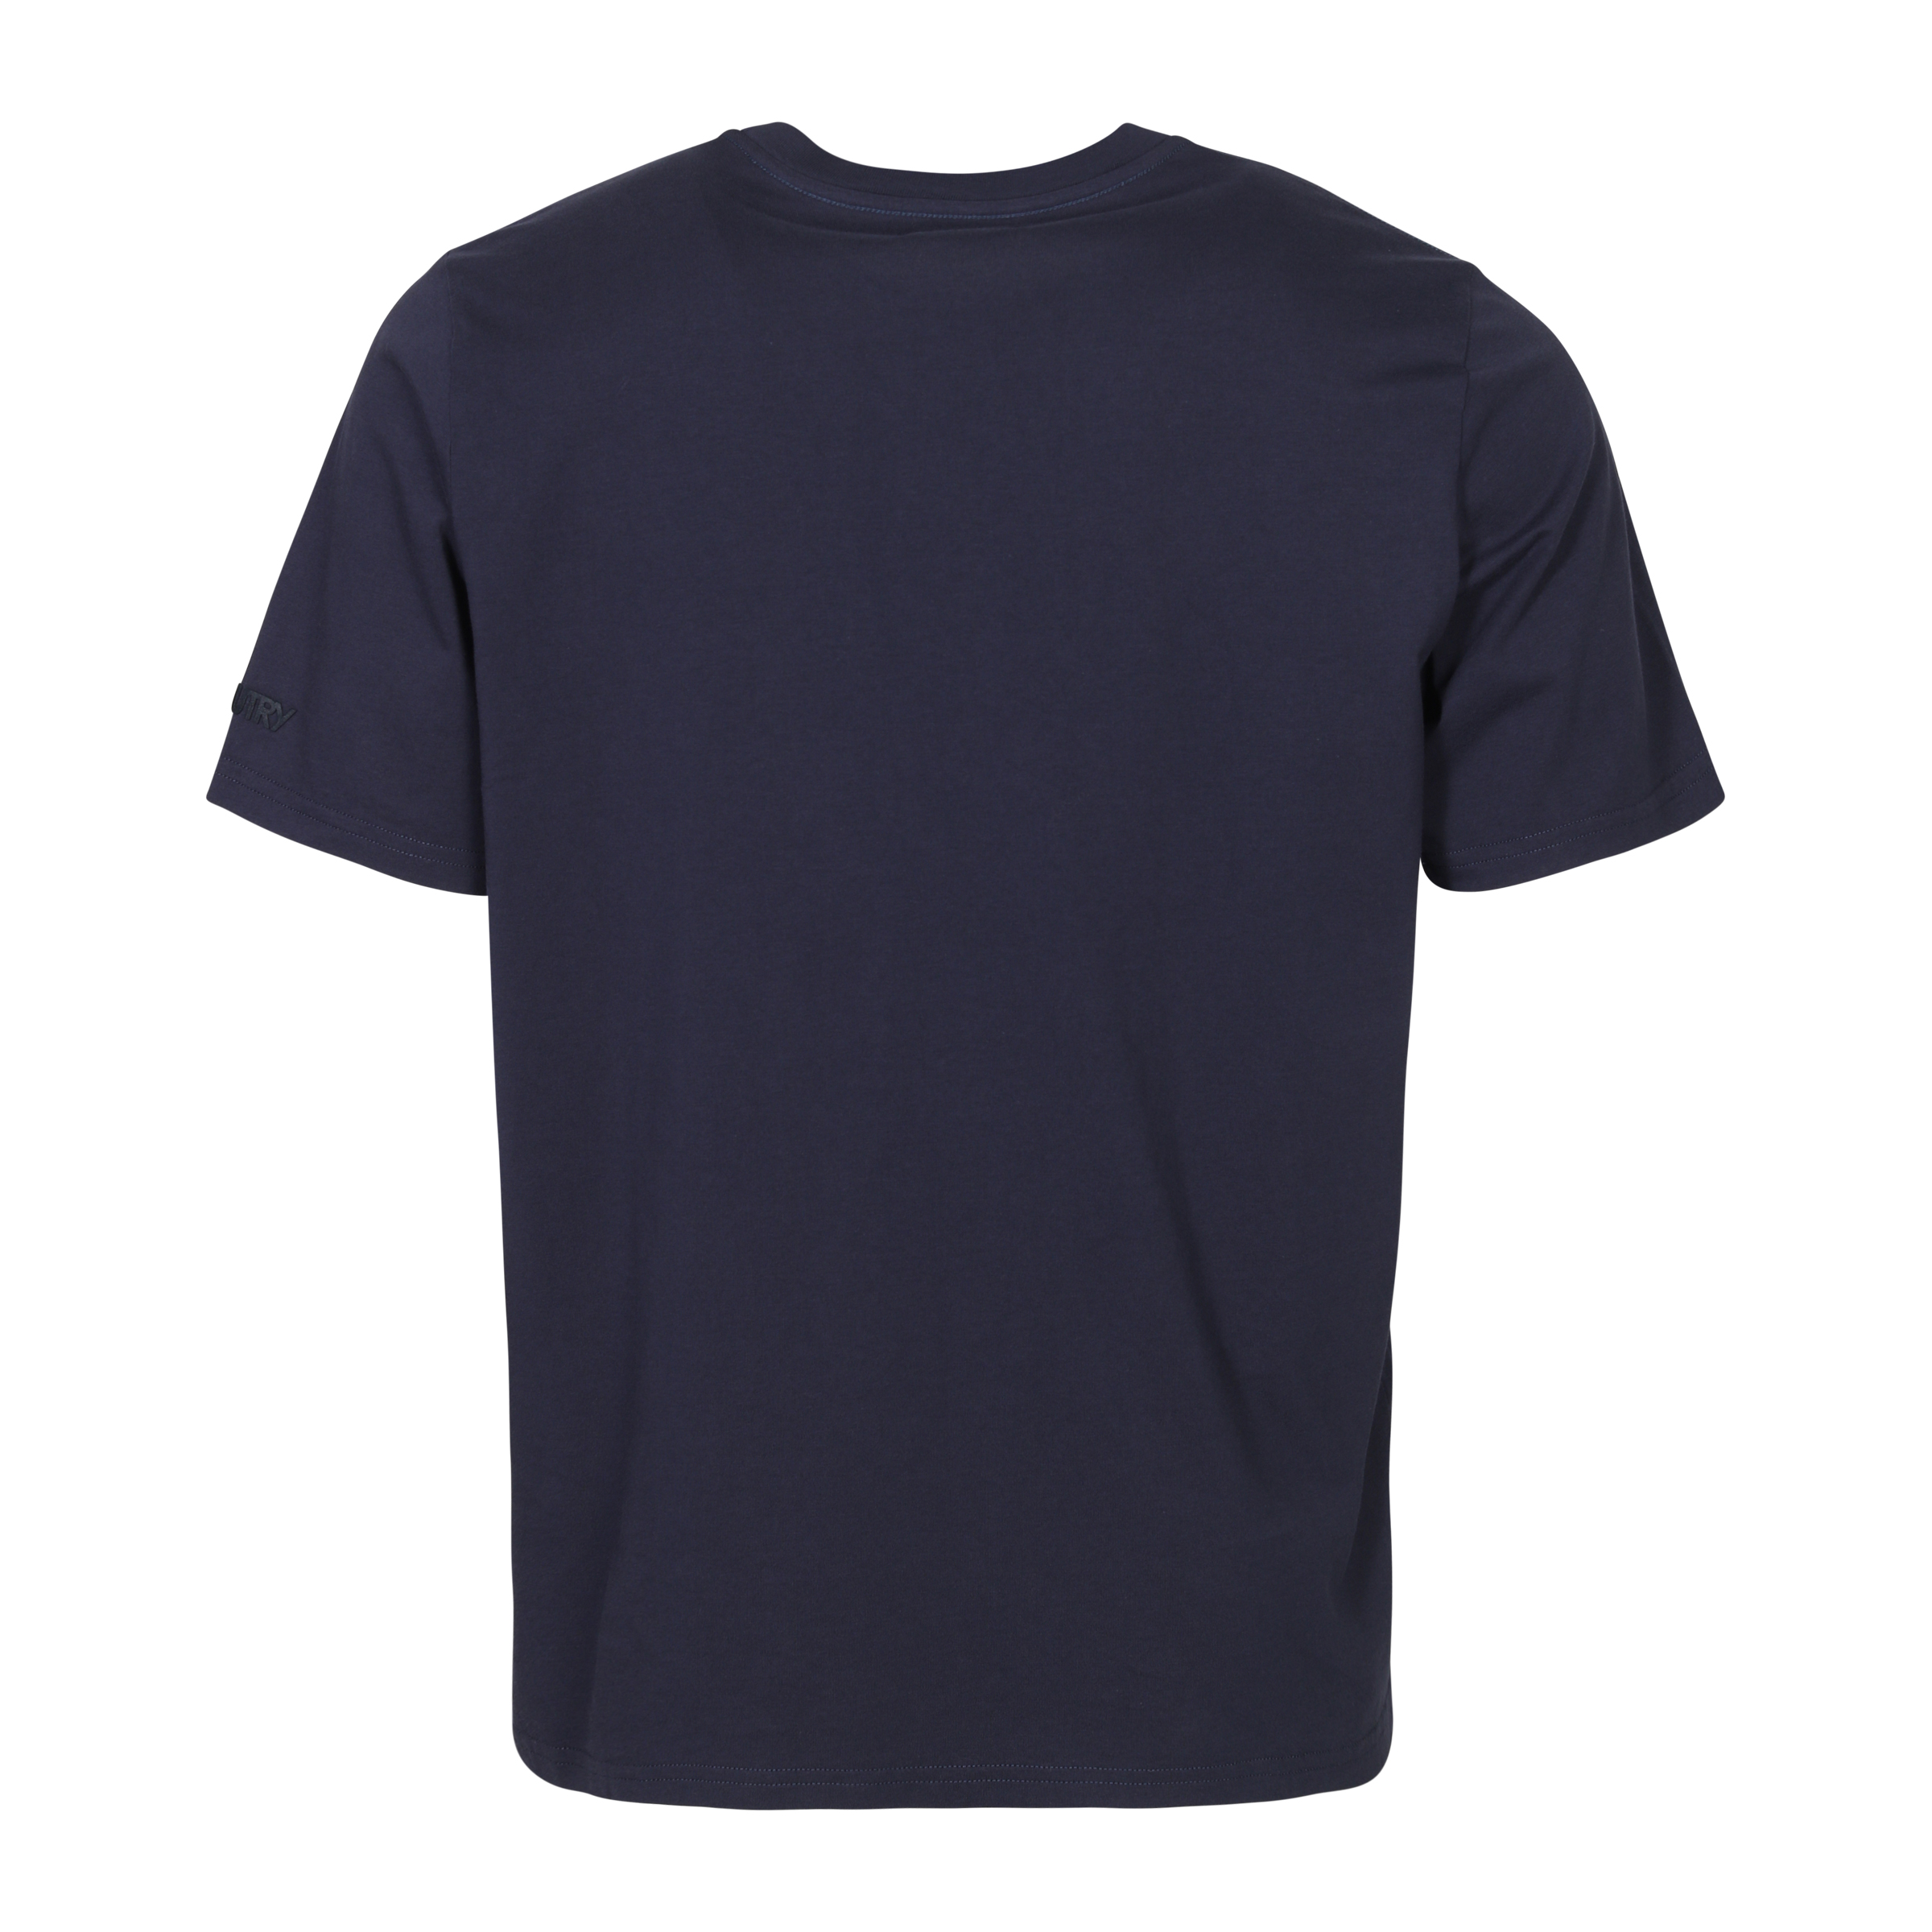 AUTRY ACTION PEOPLE Basic T-Shirt in Navy M